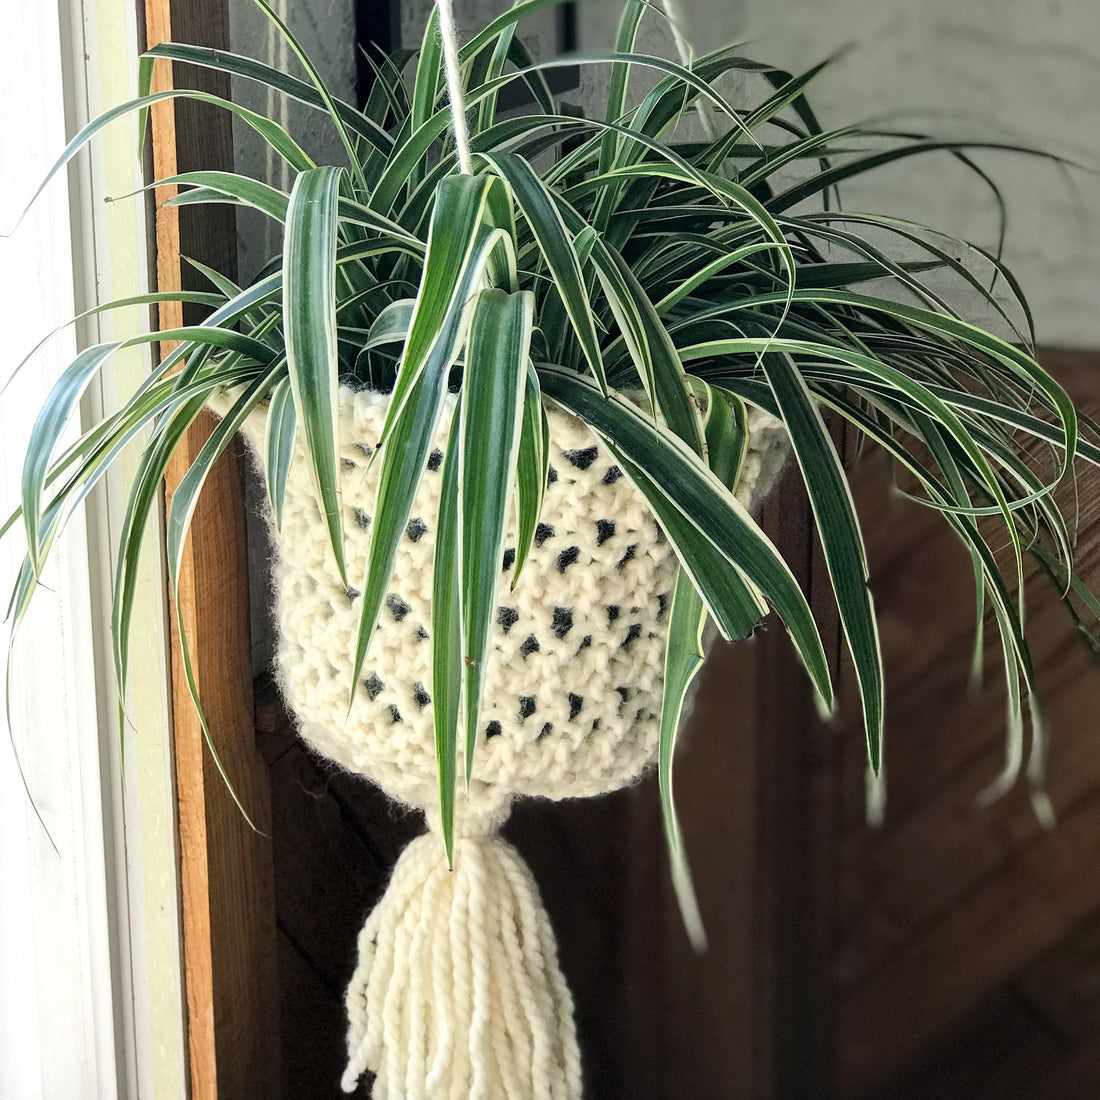 Hang In There Basket: Free Knitting Pattern